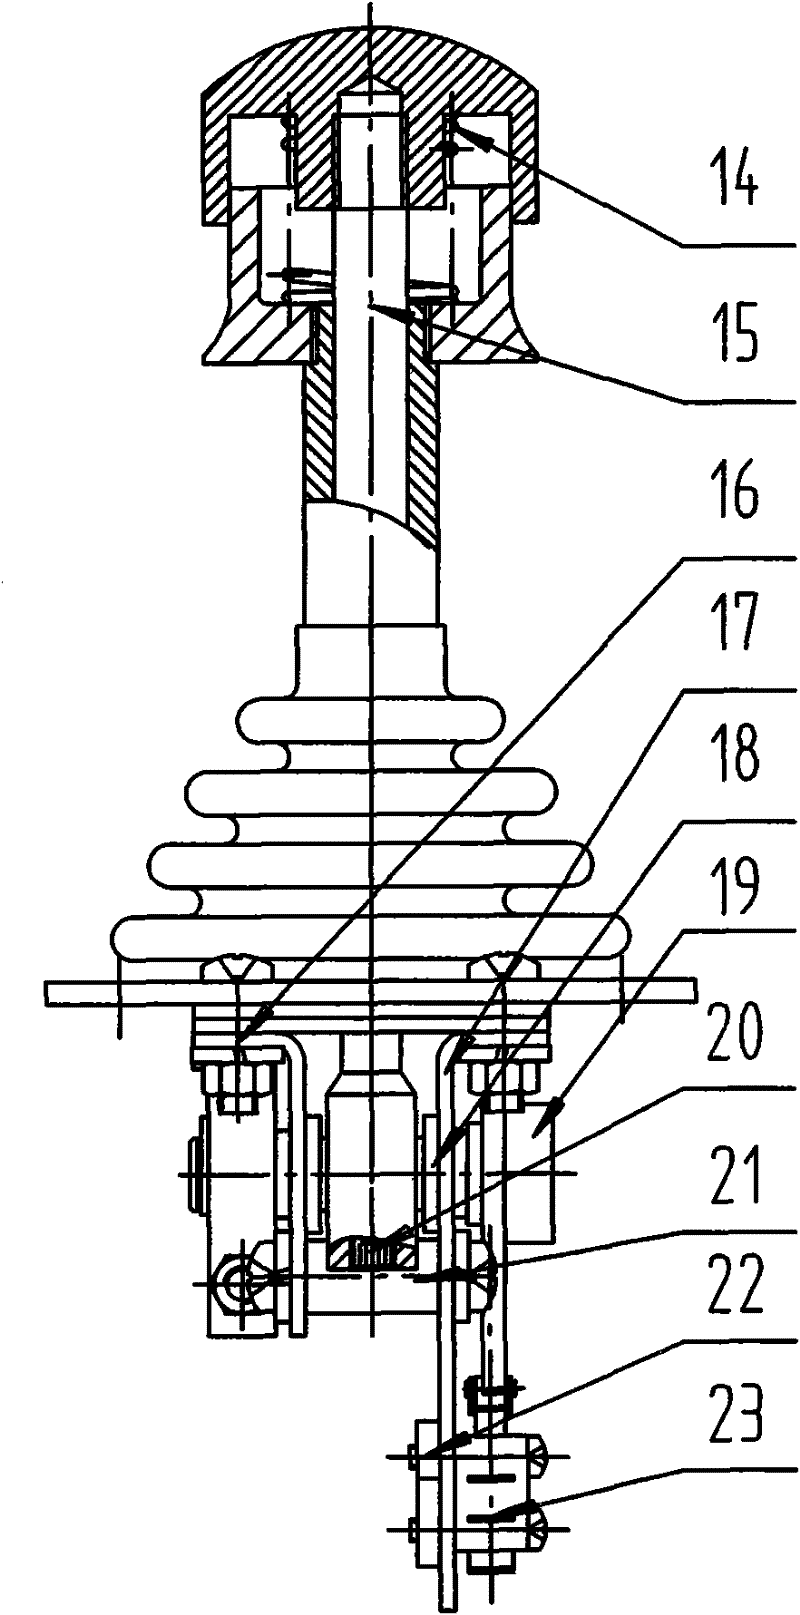 Electric control handle having functions of meso-position locking and control damping adjustment